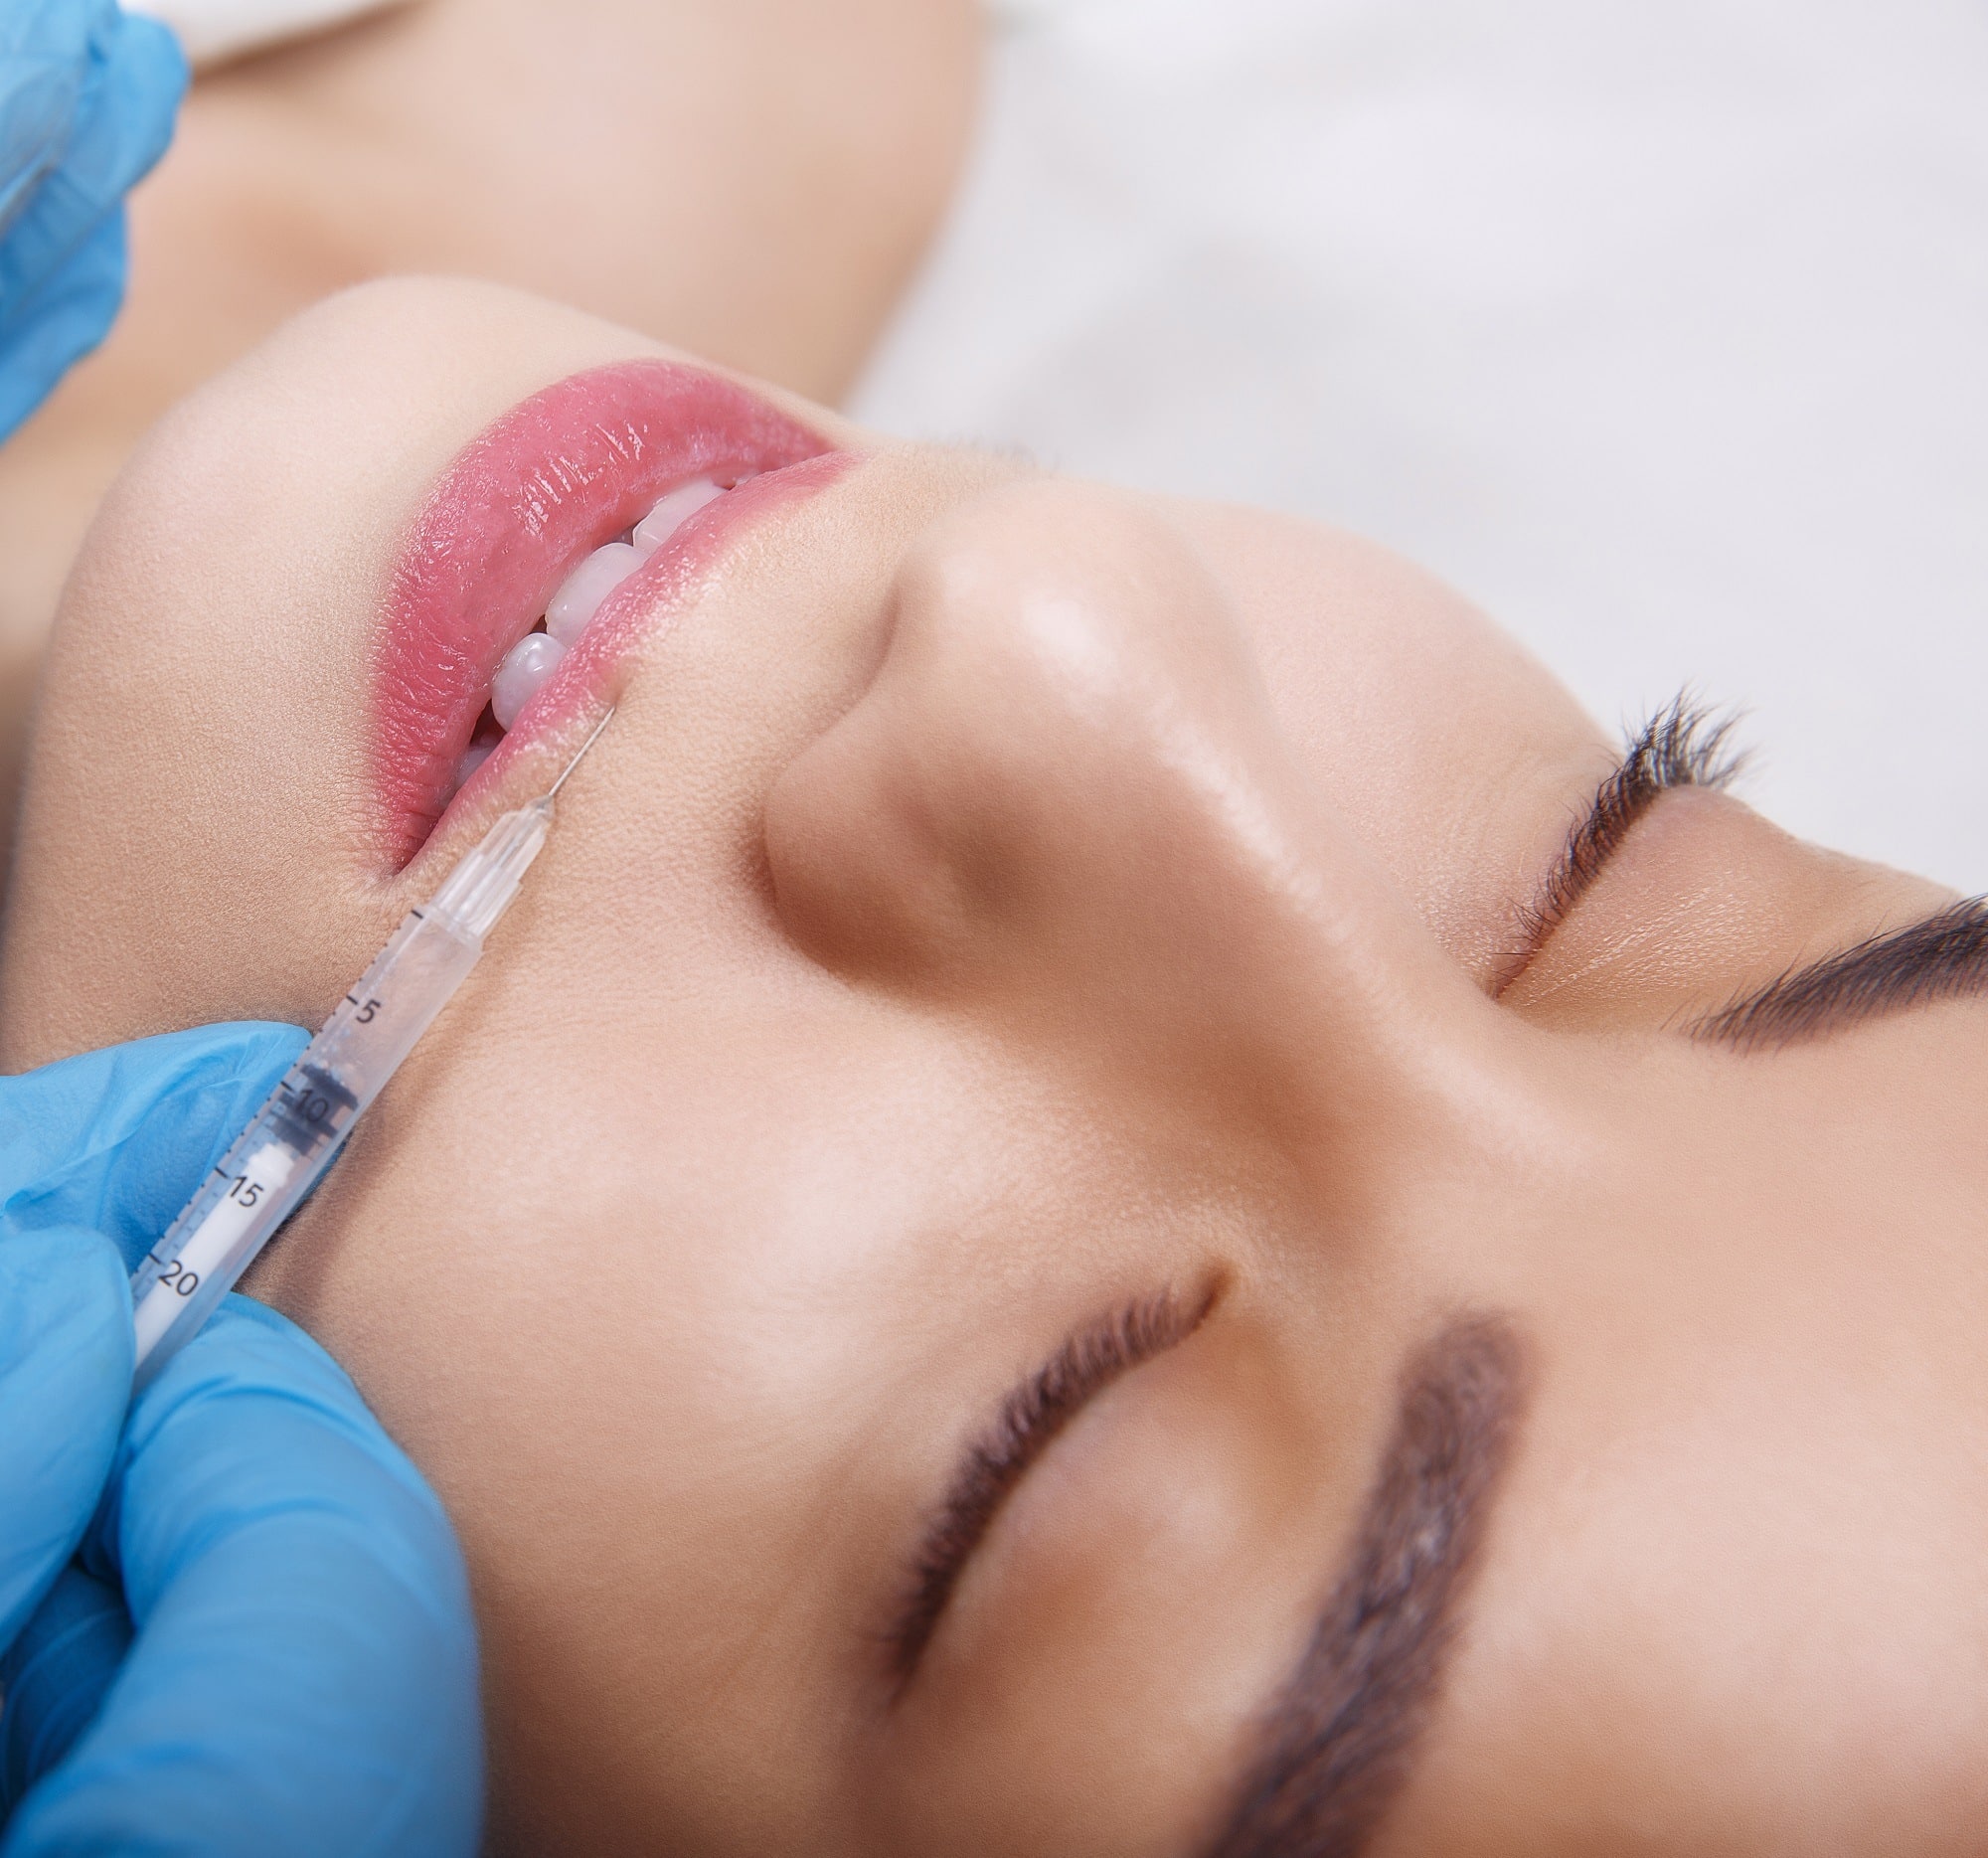 A woman receiving dermal filler treatment at the Sin Emporium clinic in Clapham, London.